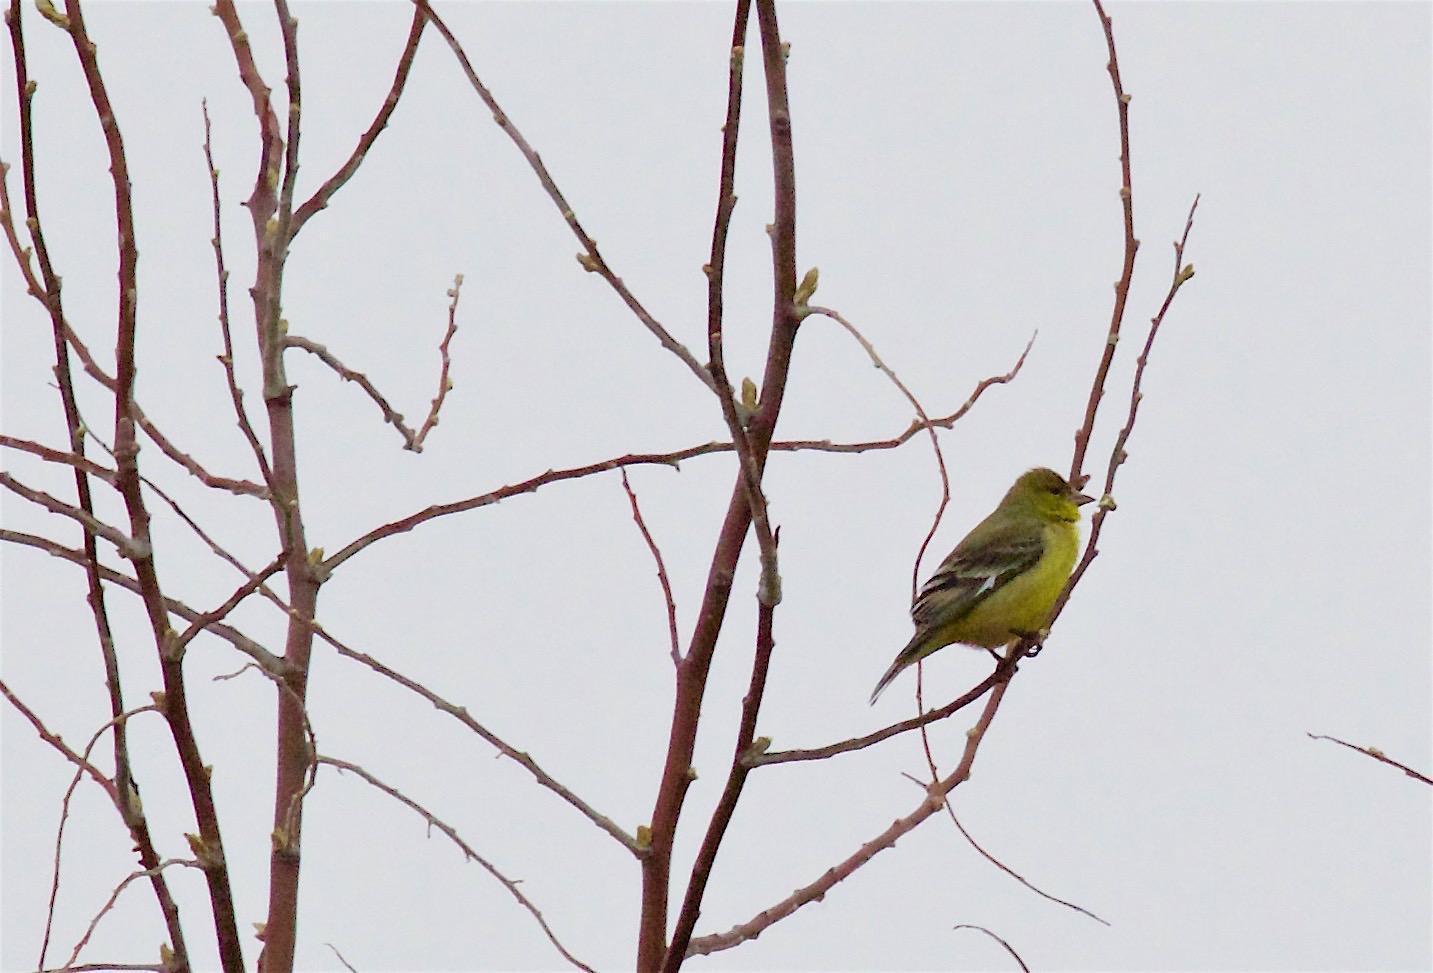 Lesser Goldfinch Photo by Kathryn Keith